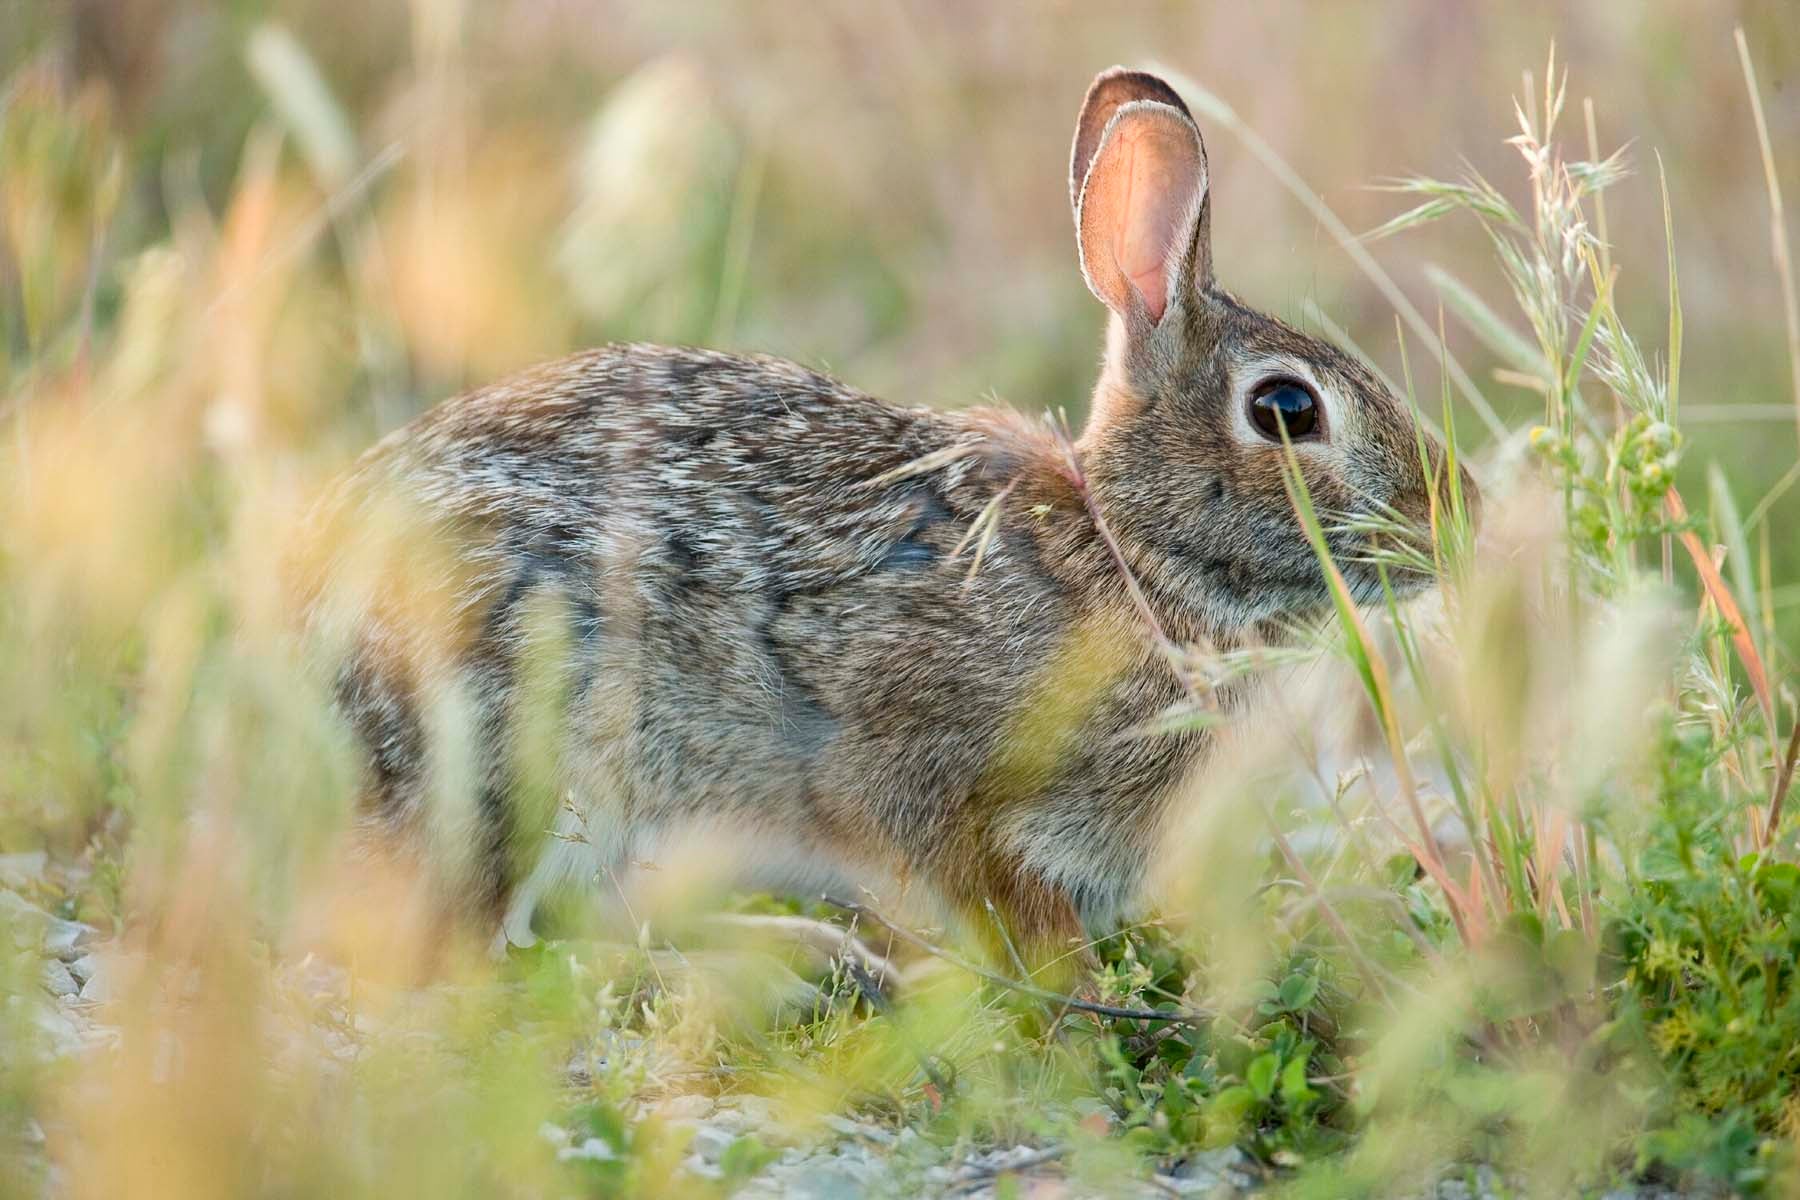 Eastern cottontail rabbit in grassy field